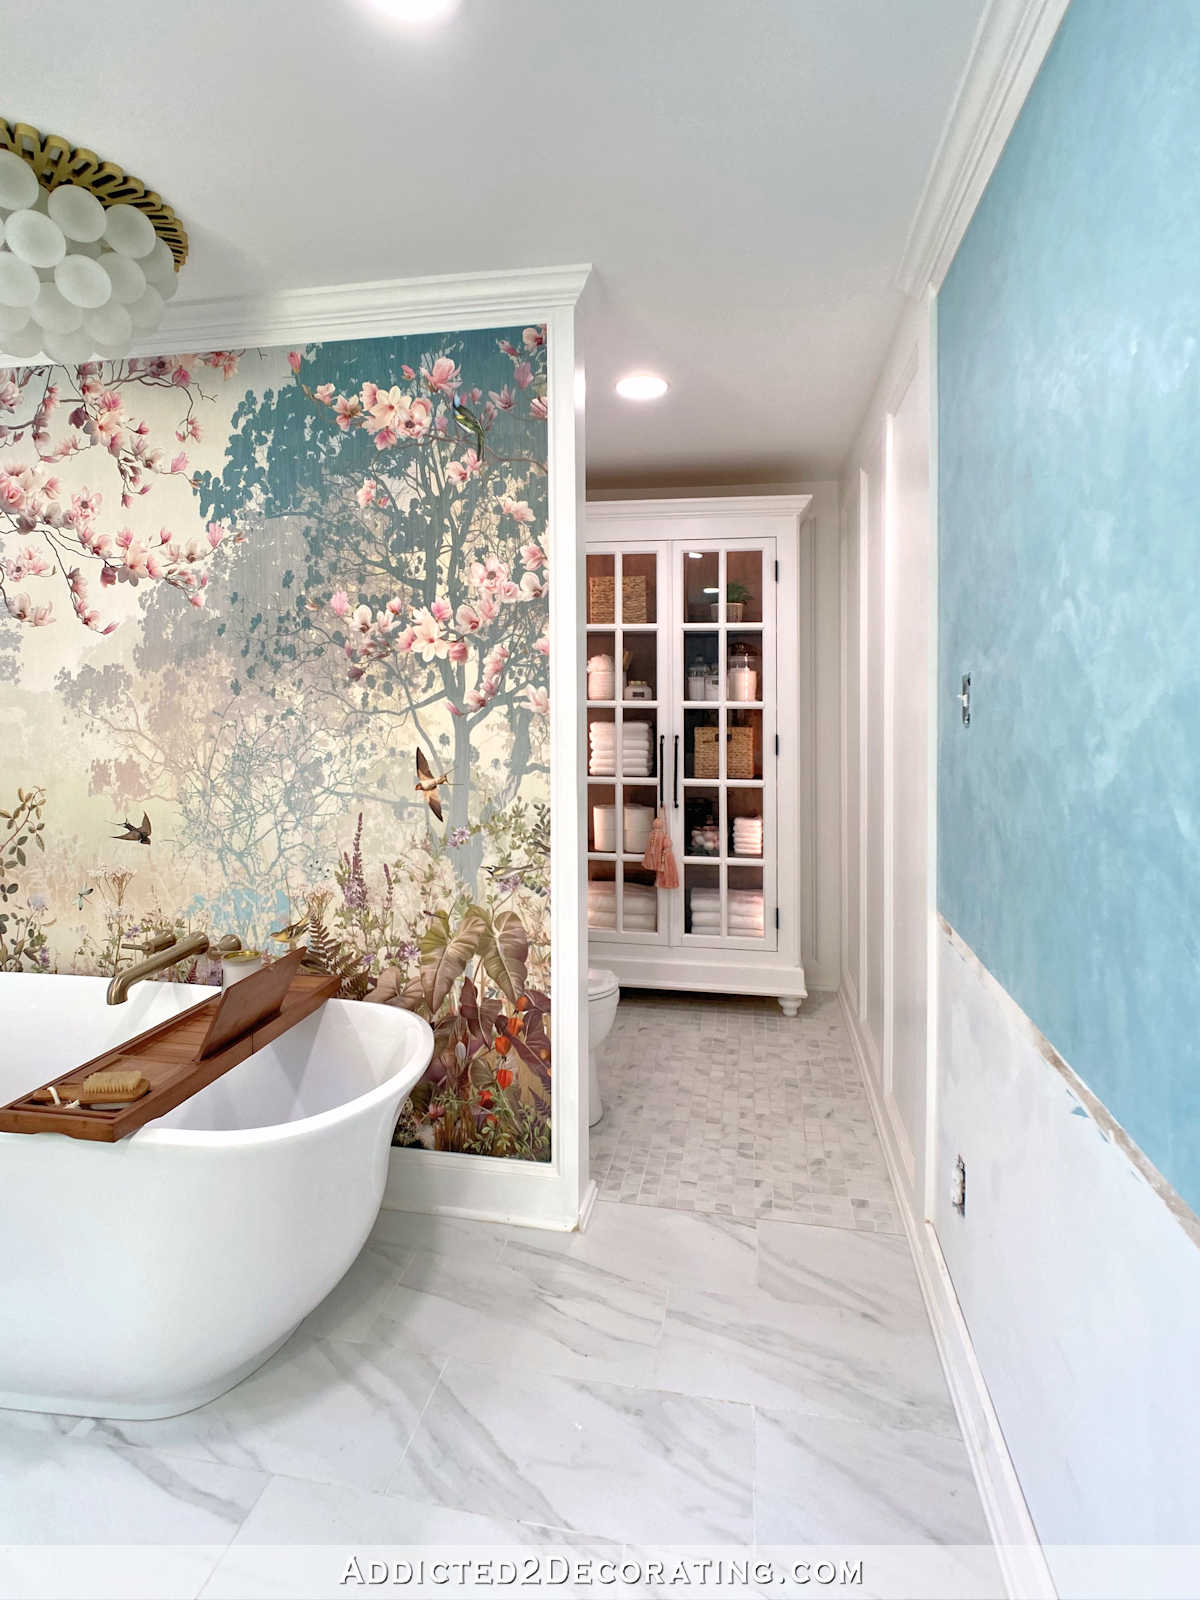 Master bathroom remodel in progress -- large forest mural behind standalone bathtub, water closet with large DIY curio cabinet